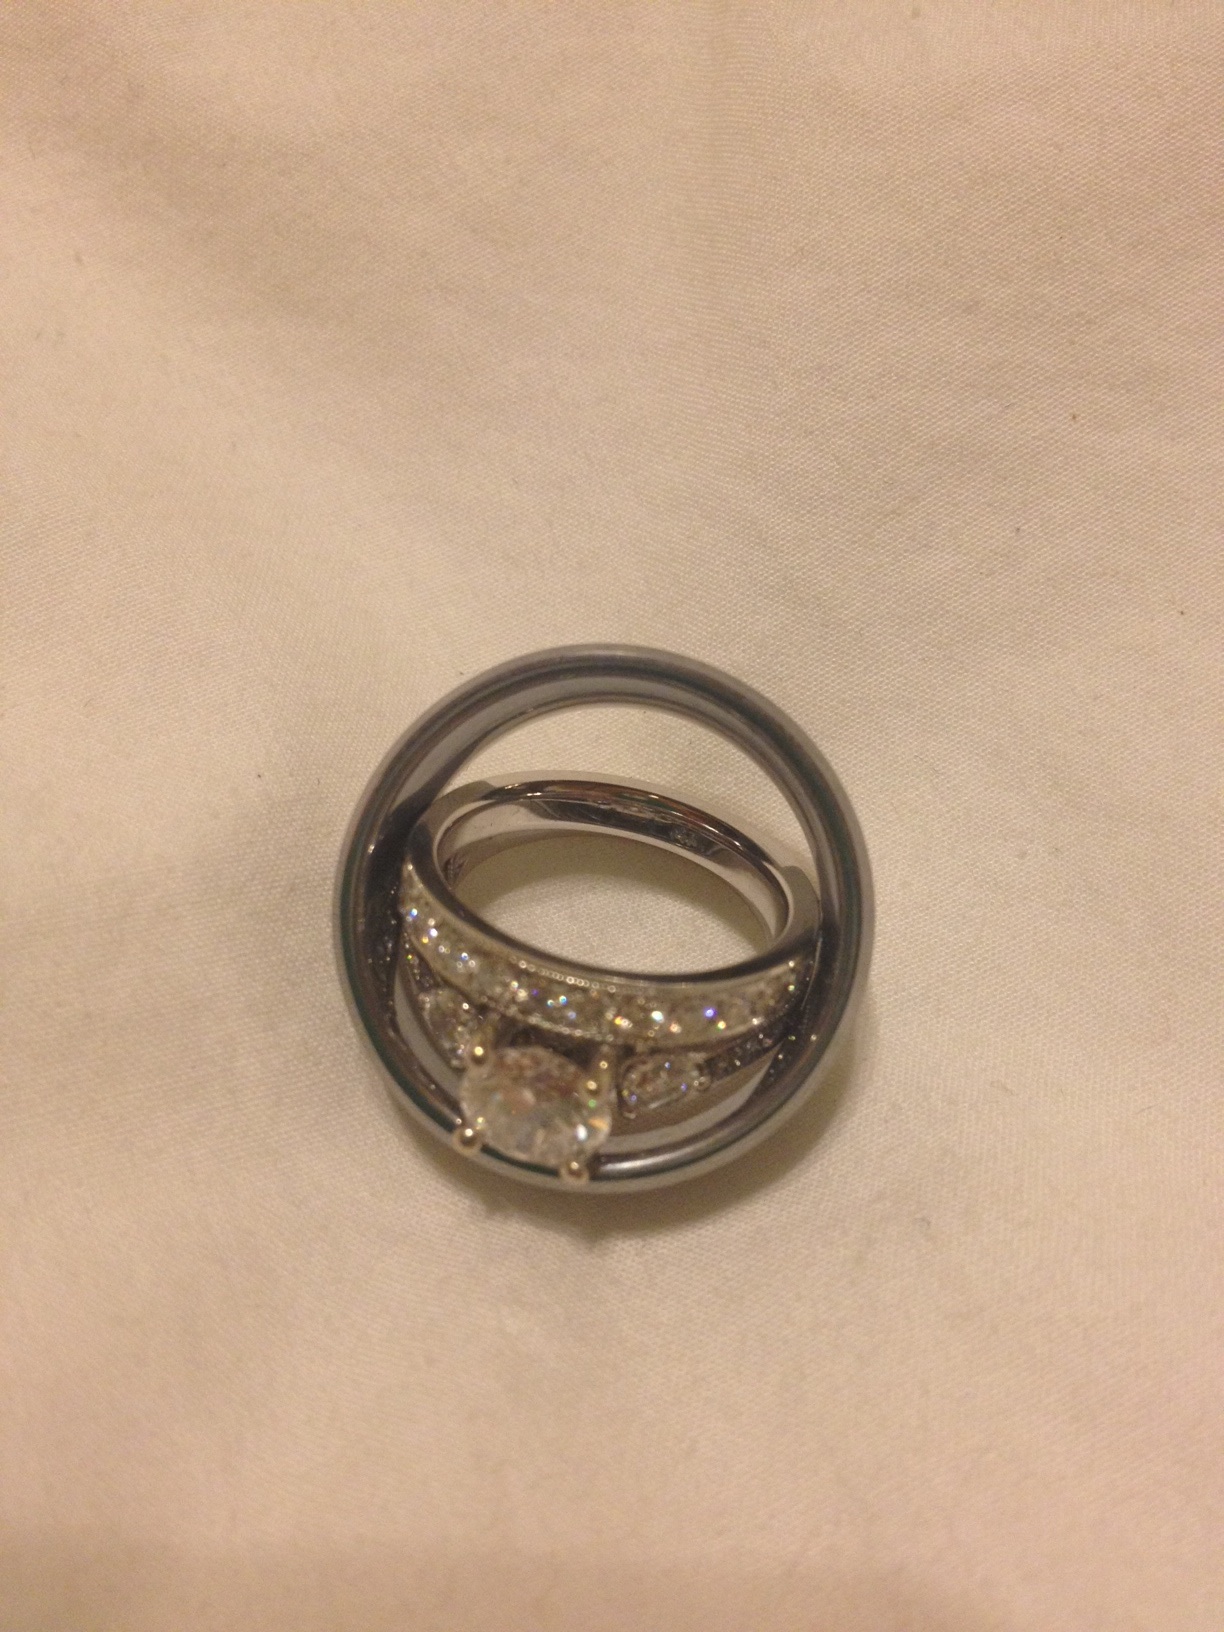 Bride-to-be Blogger Kristy: We Chose Our Wedding Rings!